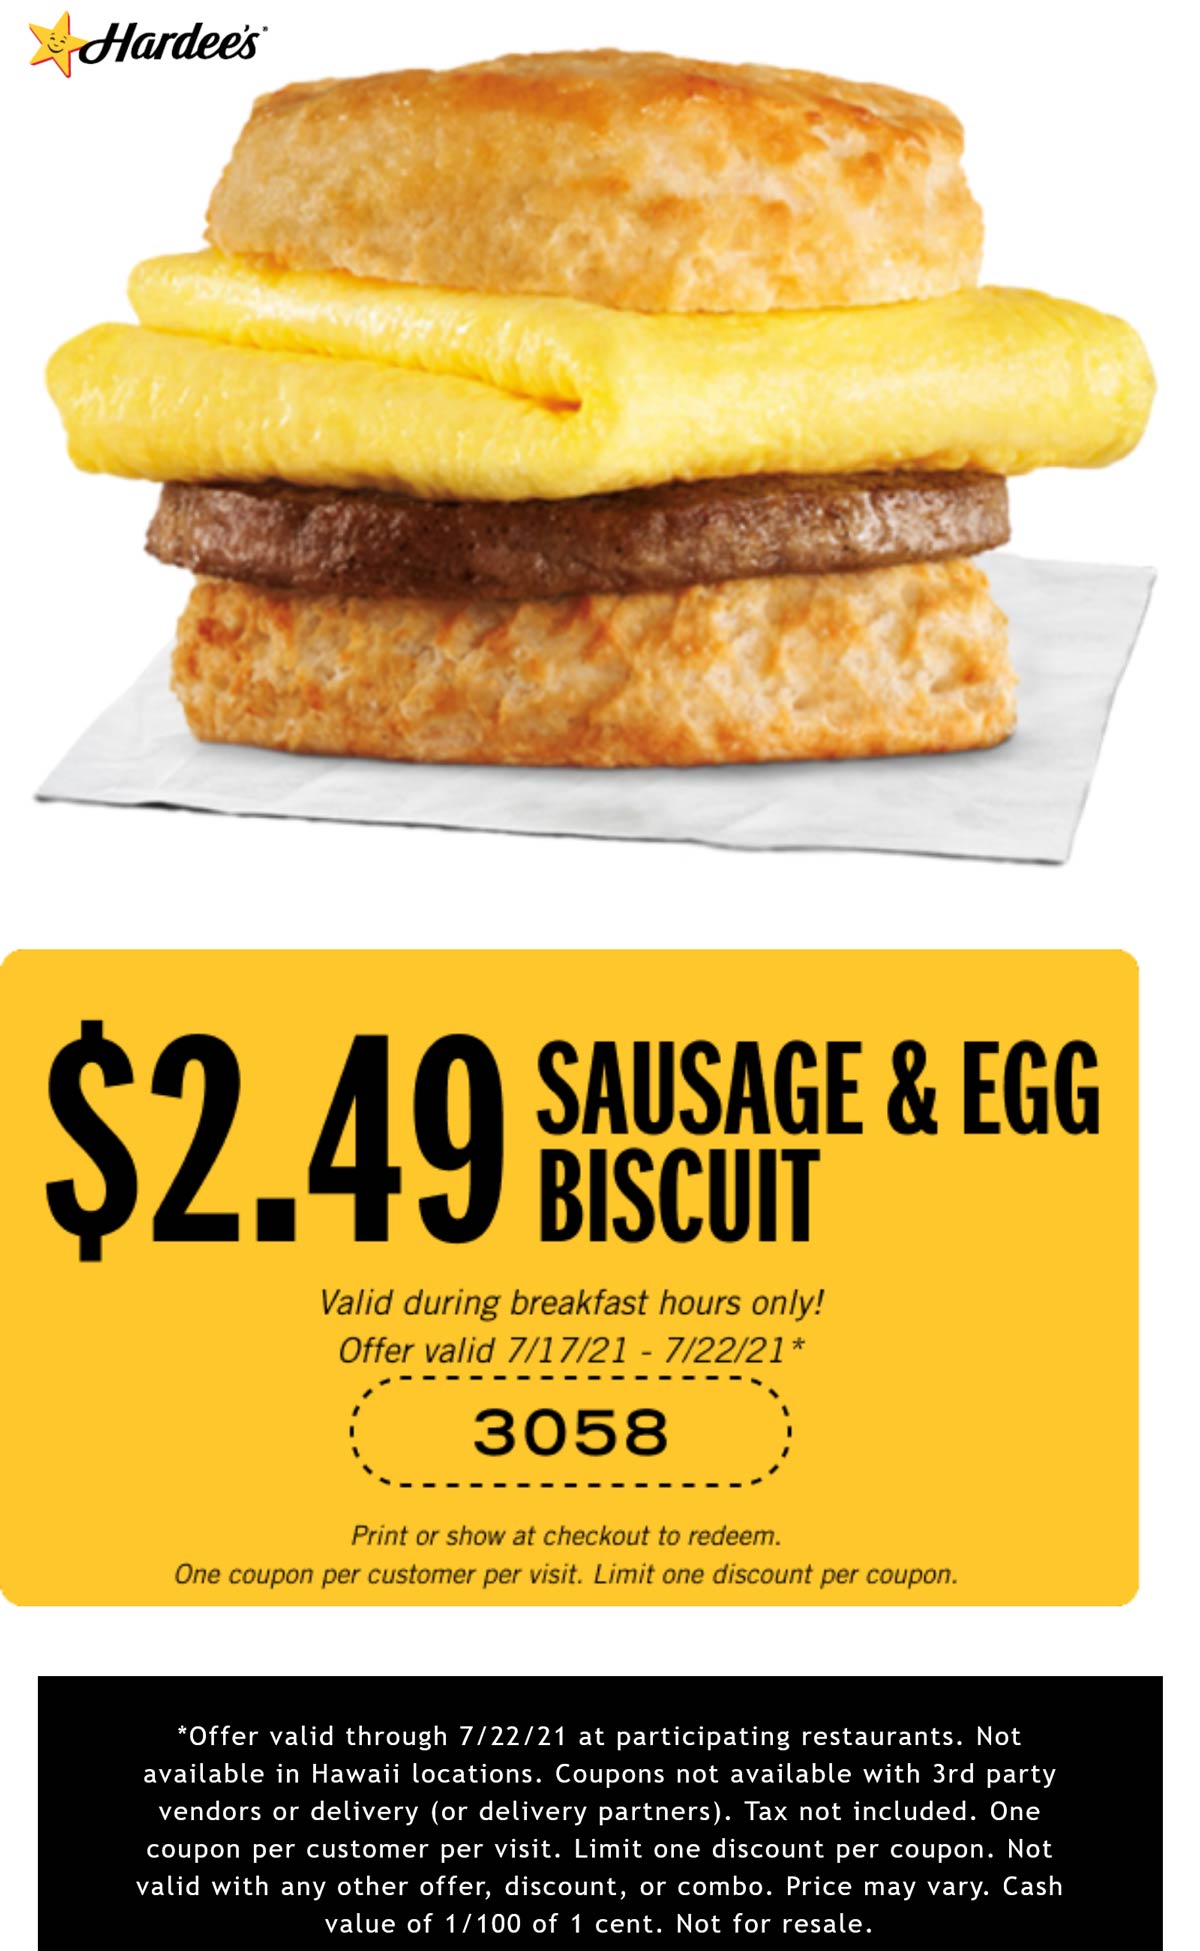 Hardees restaurants Coupon  Sausage & egg breakfast biscuit for $2.49 at Hardees #hardees 